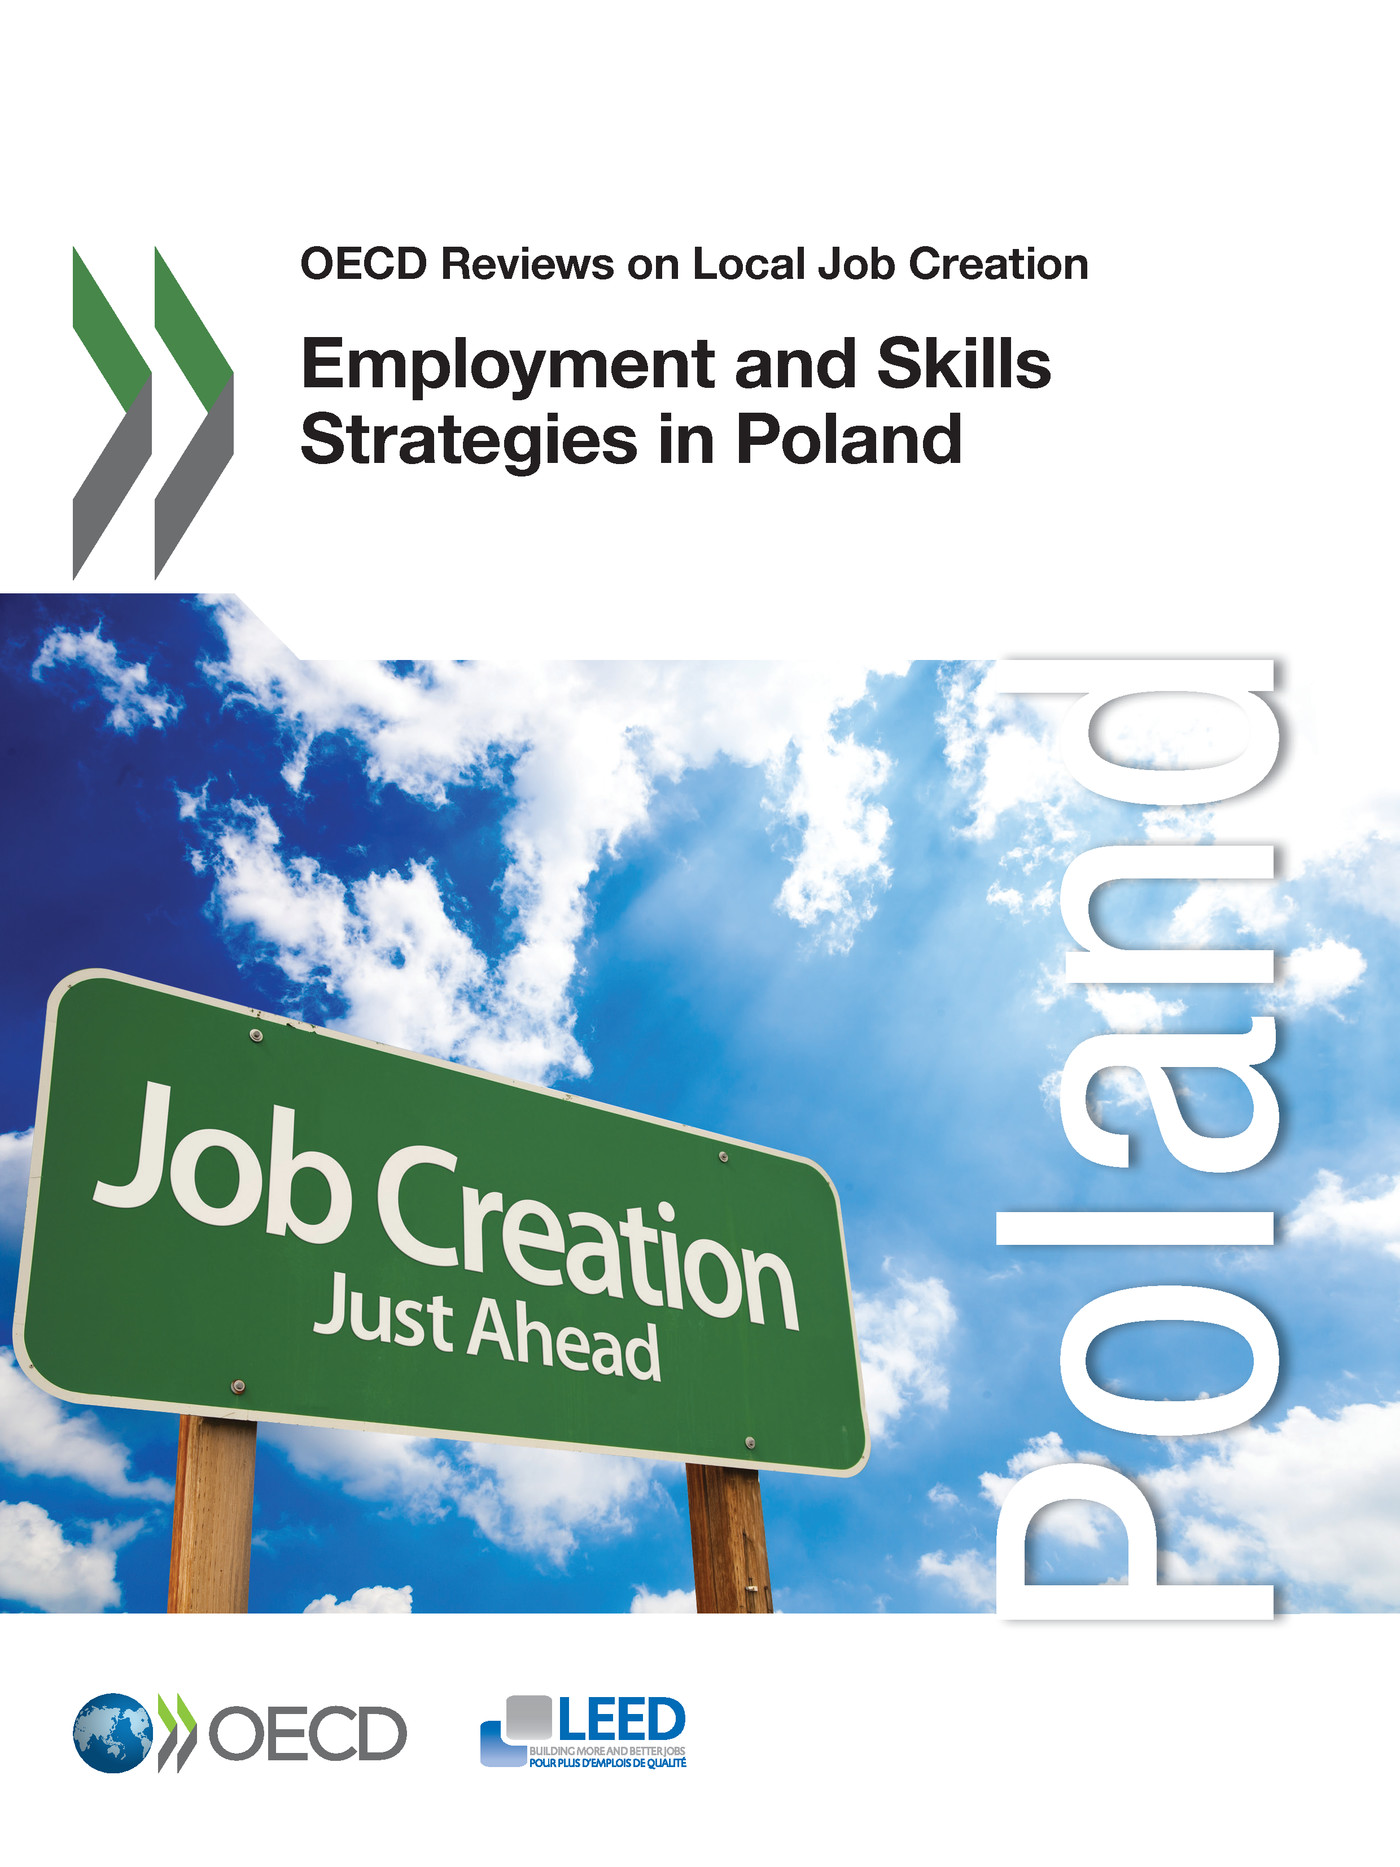 Employment and Skills Strategies in Poland -  Collectif - OCDE / OECD